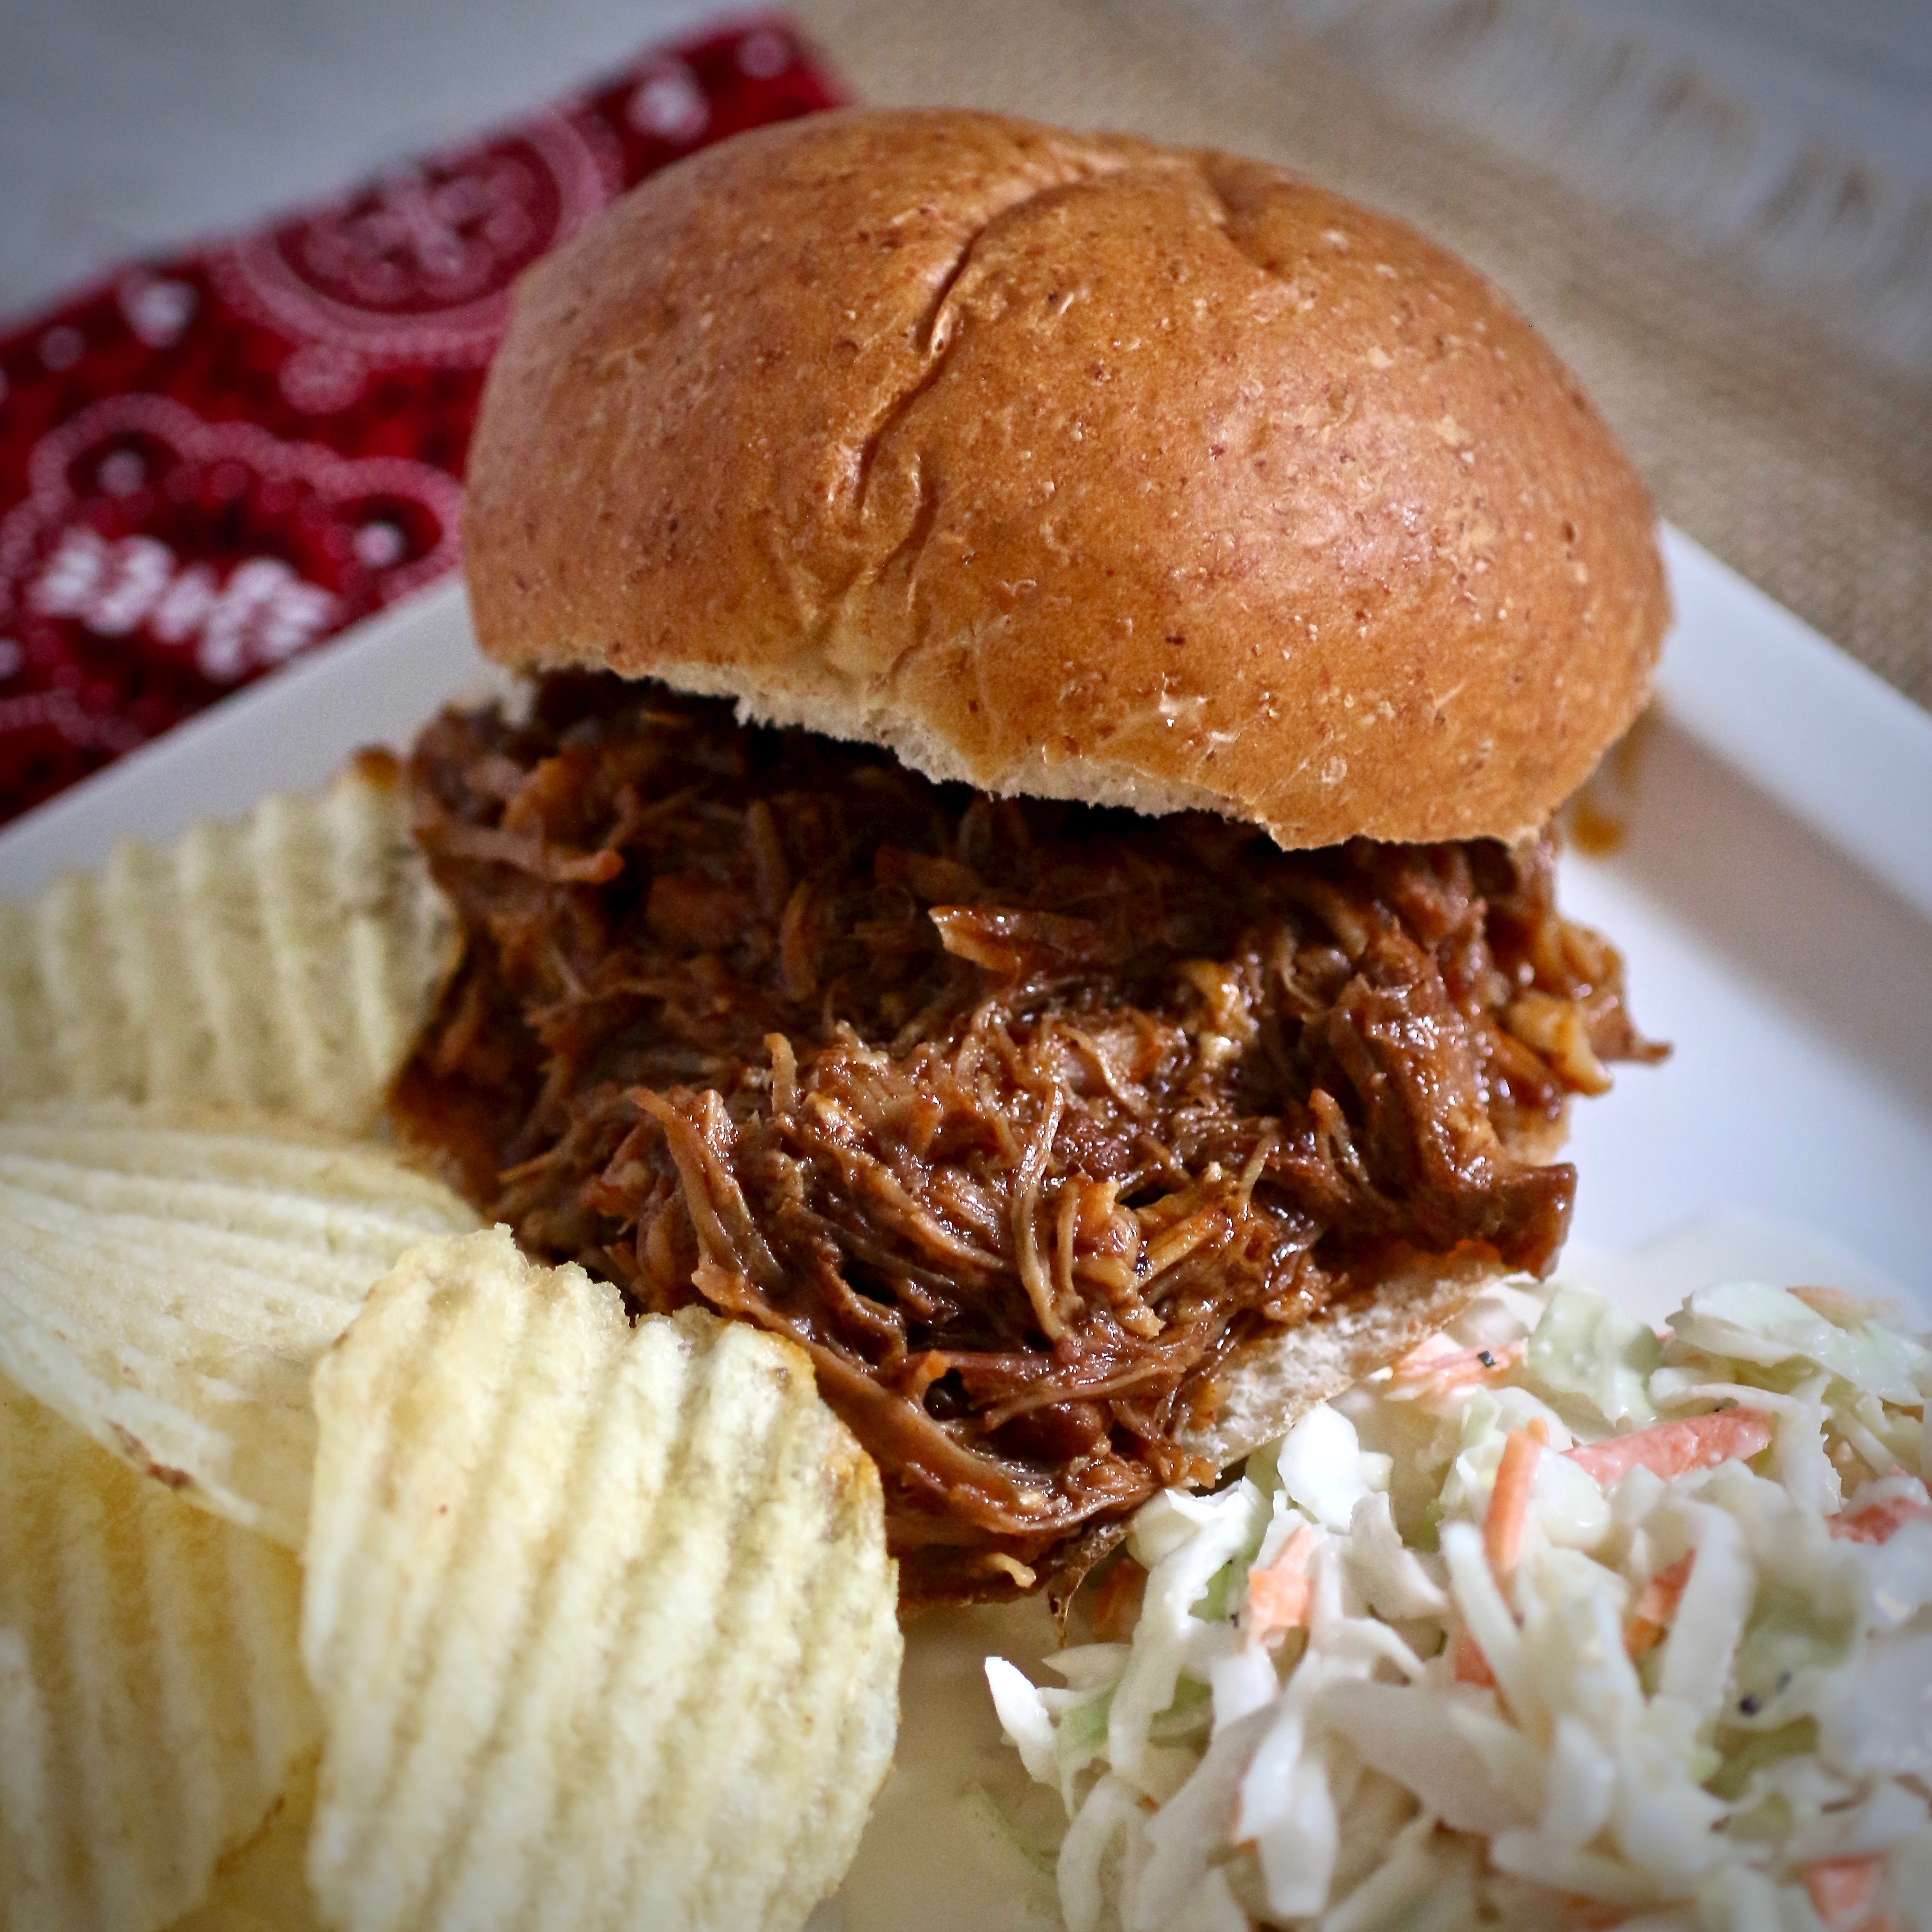 Instant Pot® Pulled Pork Sandwiches